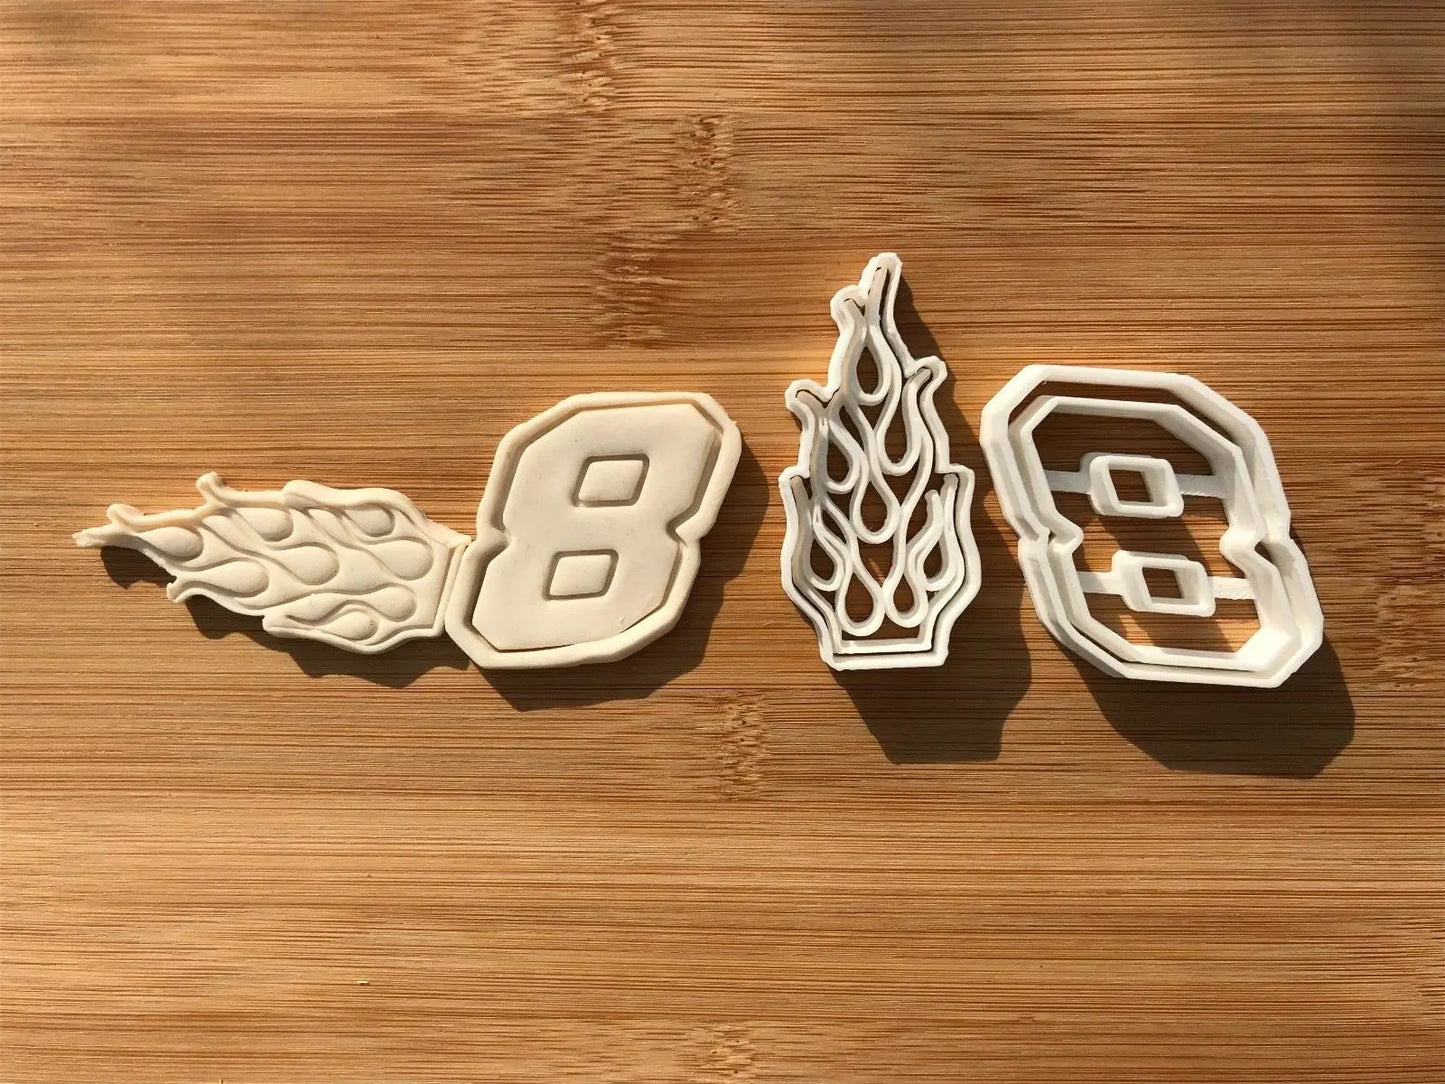 Eight 8 Racing Number Cookie cutter MEG cookie cutters